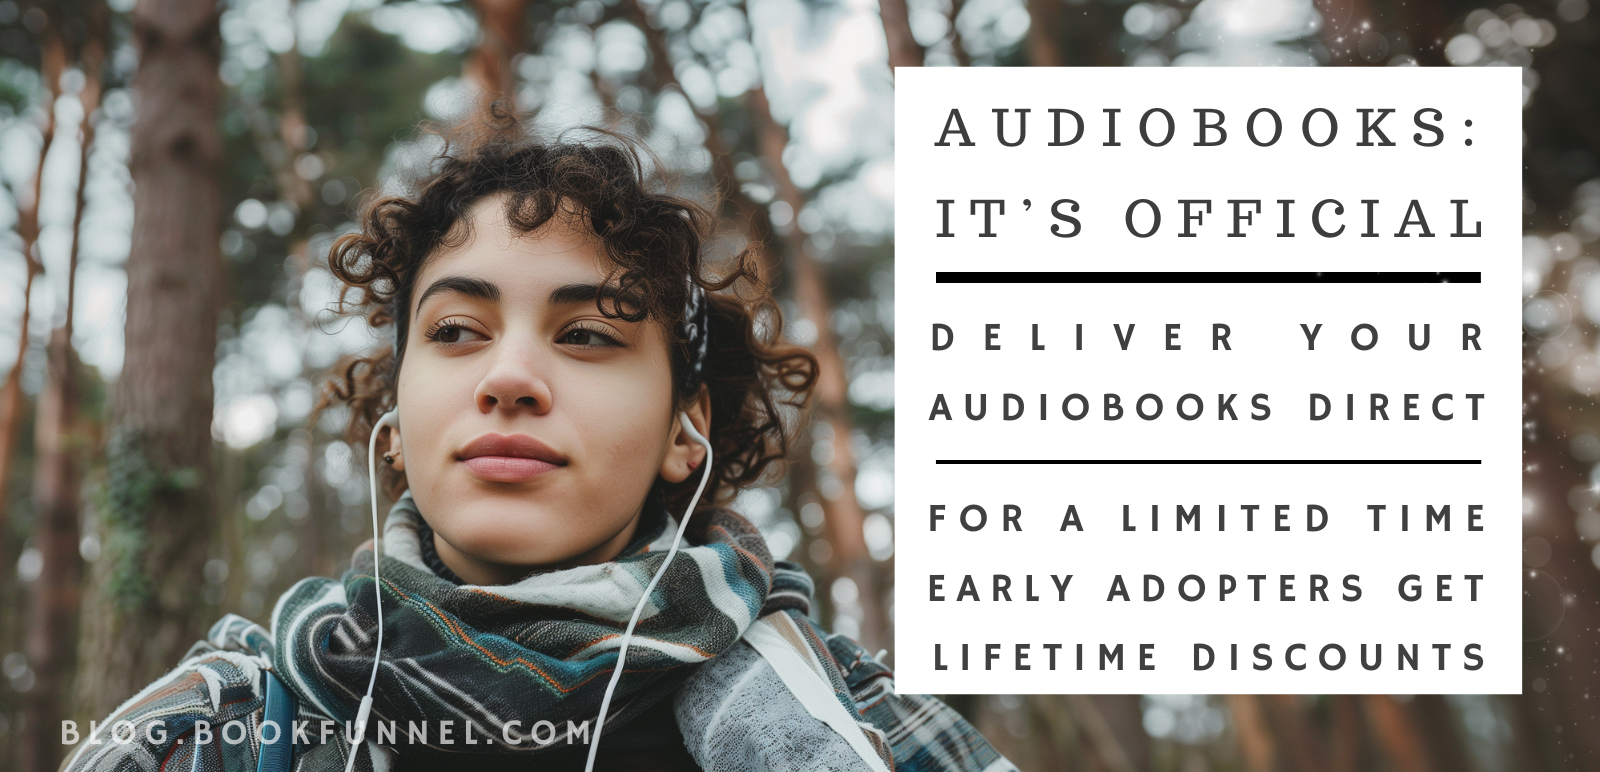 Audiobook Pricing: Lock-in the Early Audio Adopter Rate Starting Today